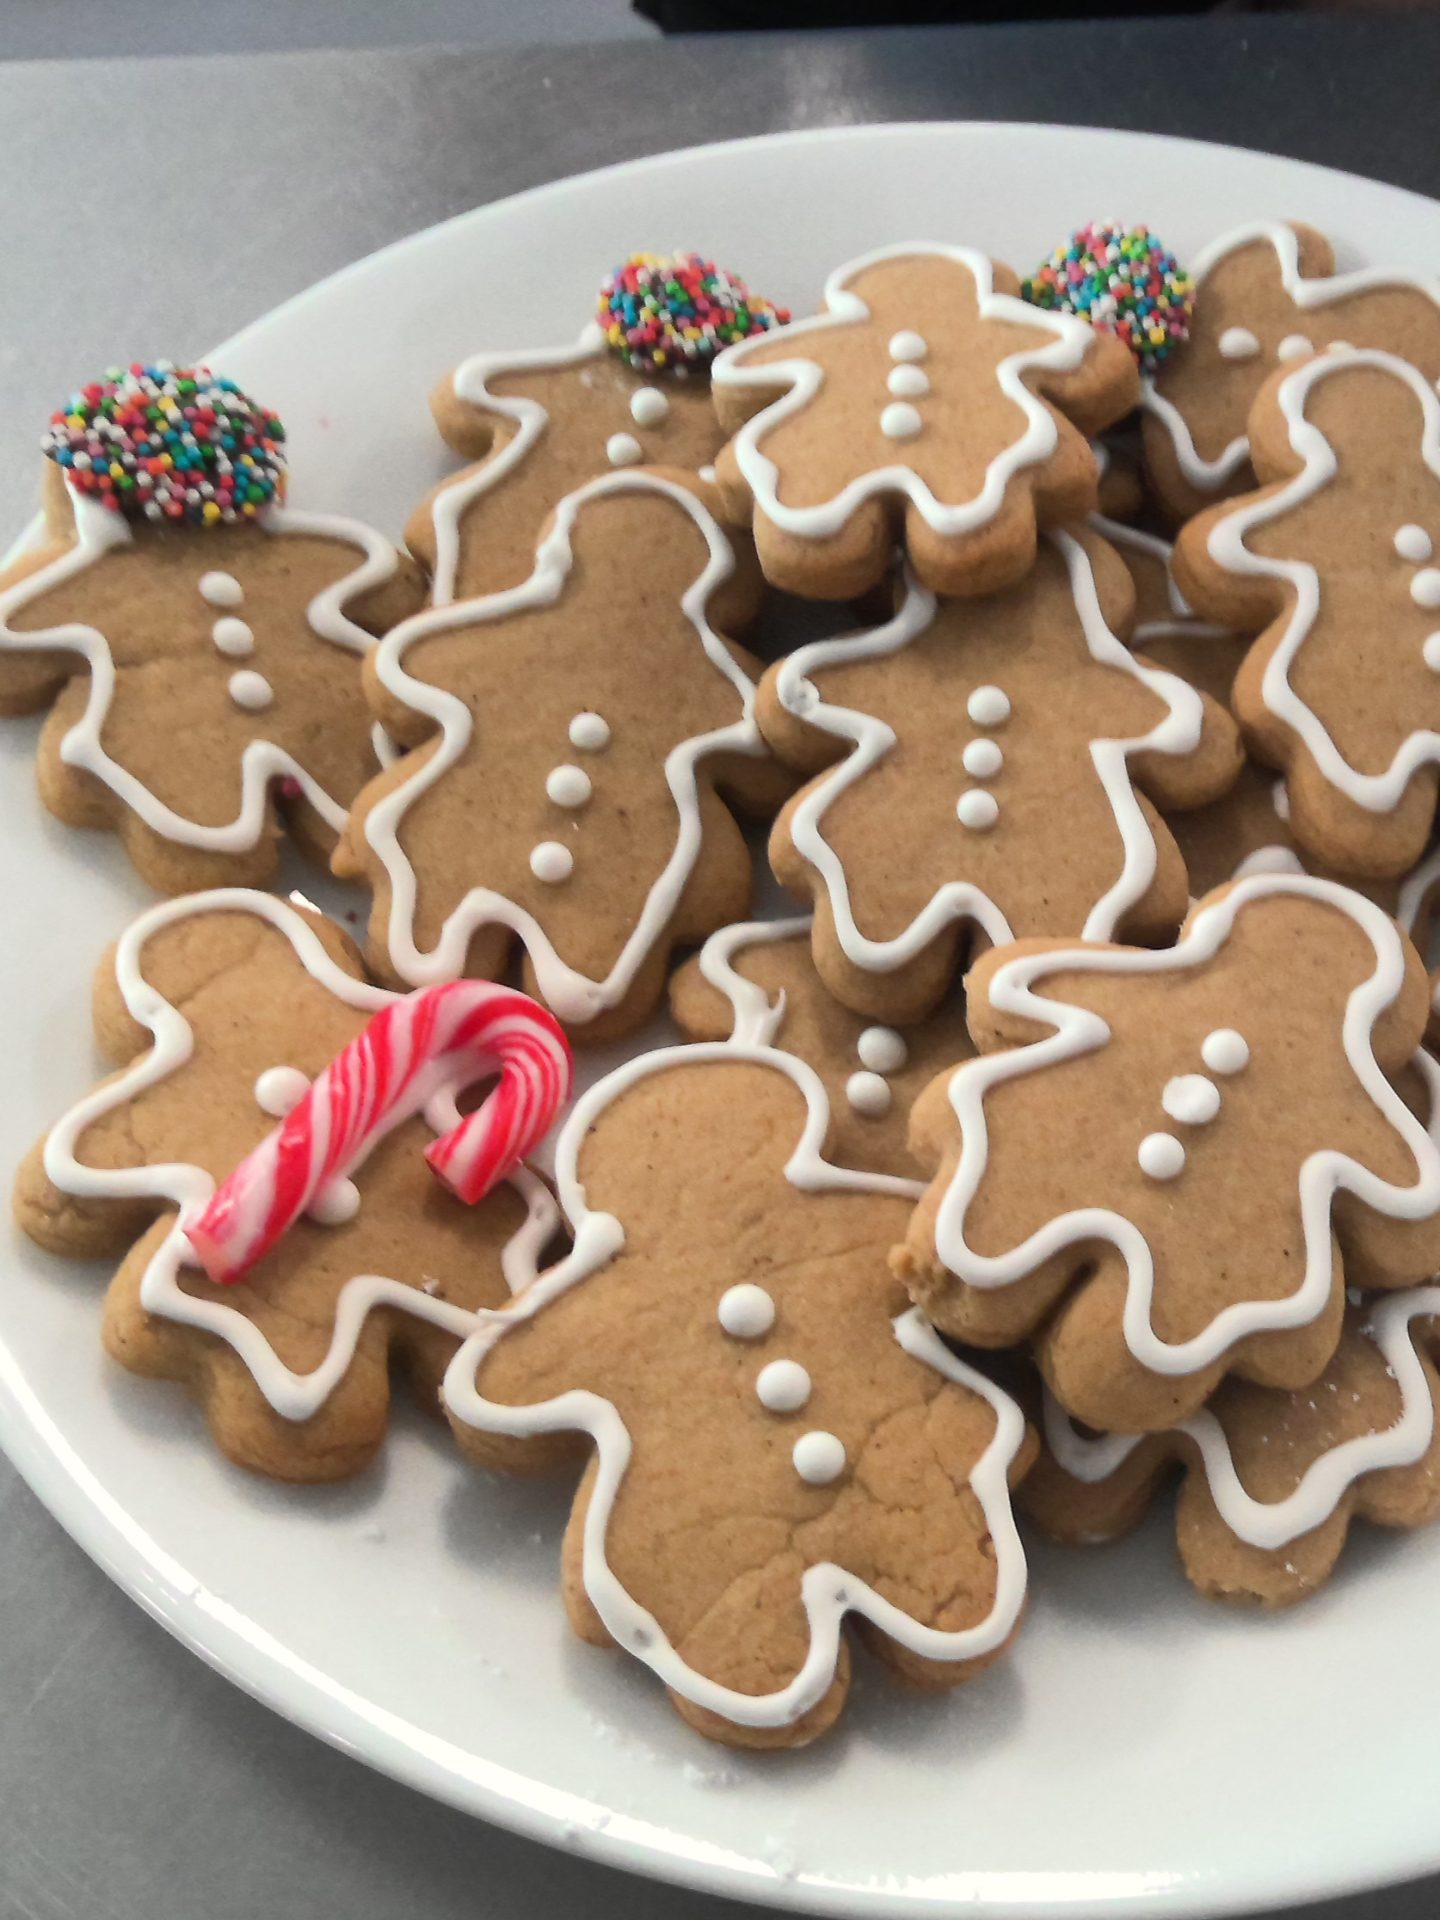 A photo of gingerbread people and a candy cane.